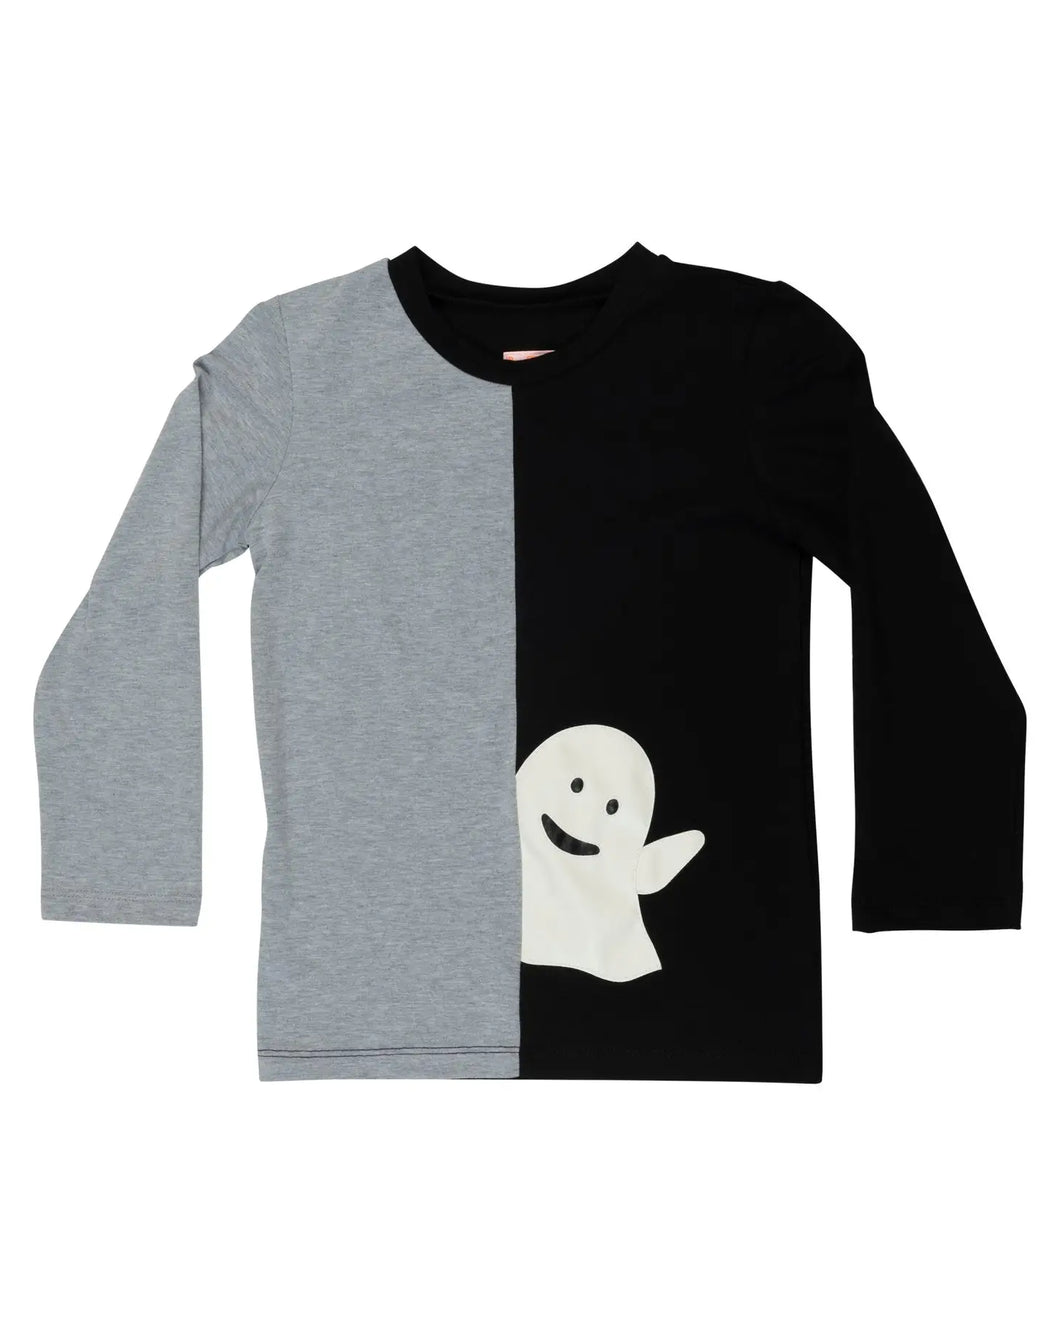 Hello Ghost T-Shirt (Toddlers/Kids)